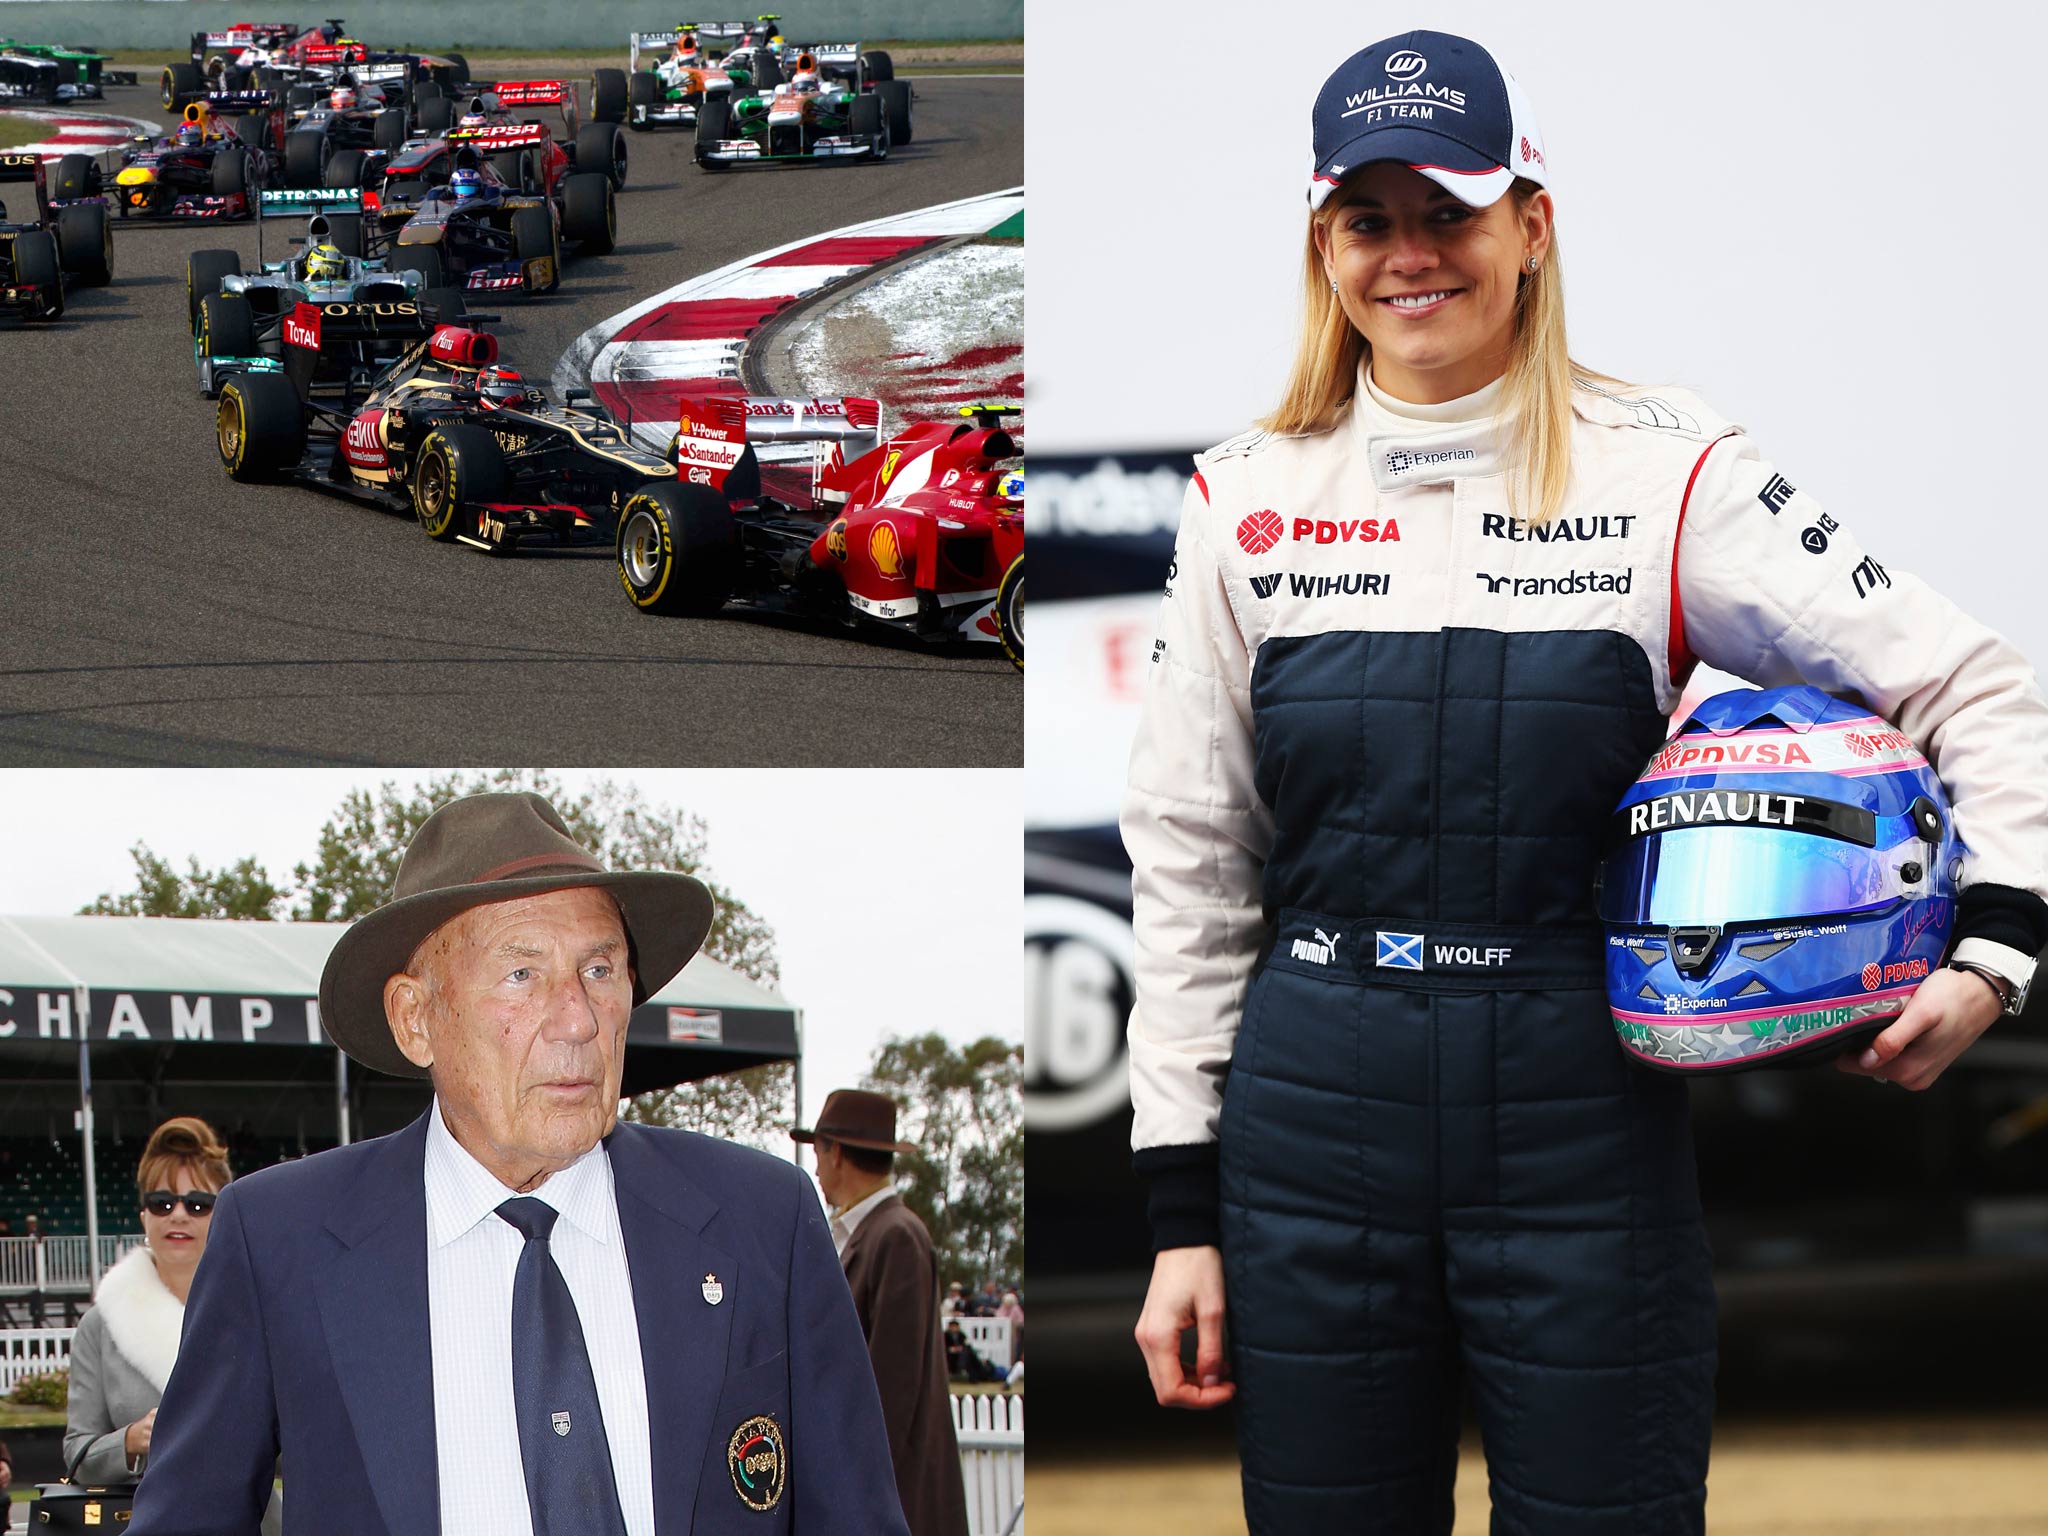 Williams development driver Susie Wolff (right), and Sir Sterling Moss, bottom left